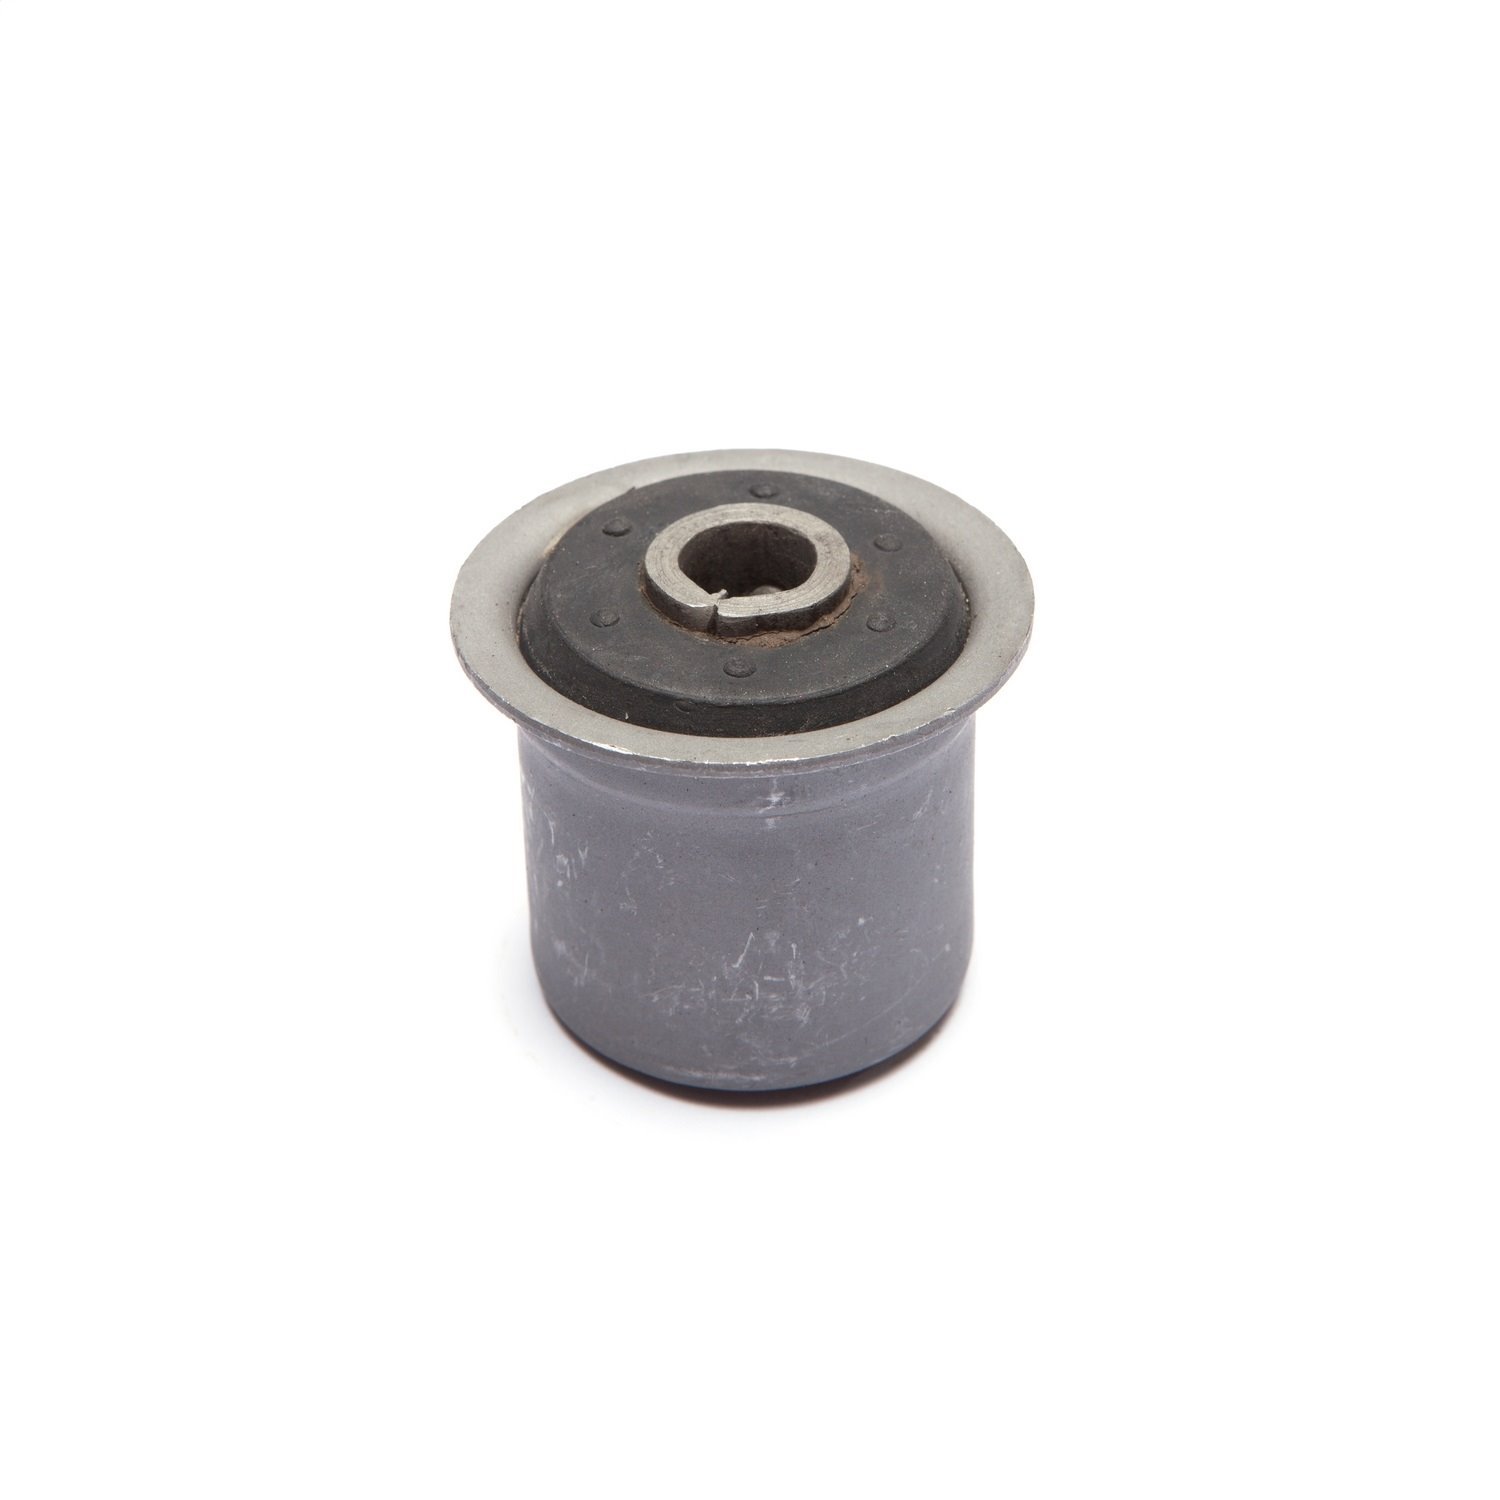 Stock replacement upper control arm bushing from Omix-ADA,